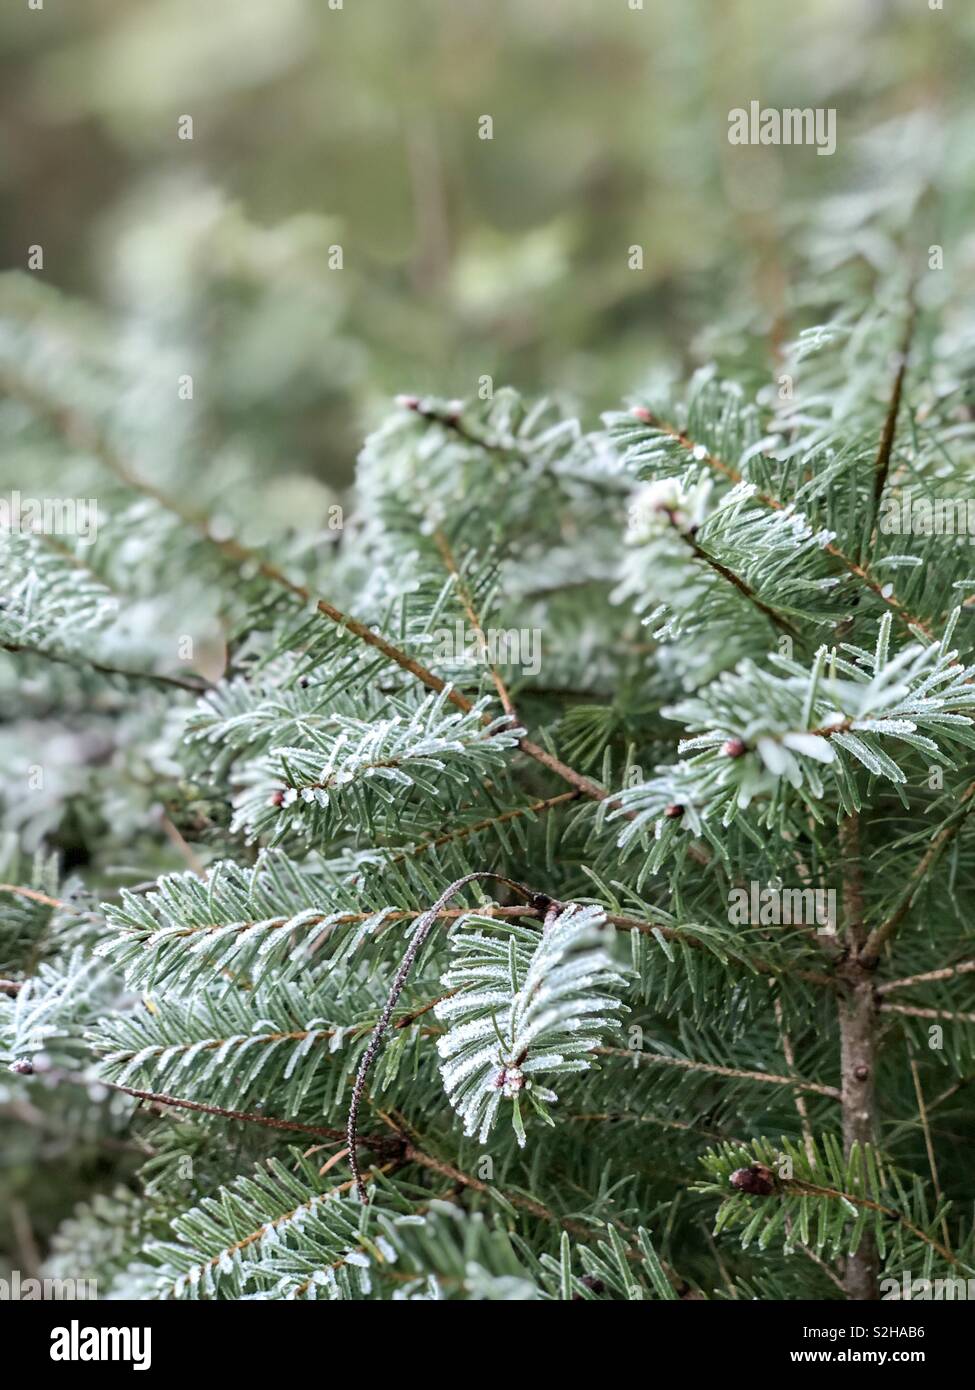 Green conifer needle-leaved tree in winter with some frozen snow Stock Photo